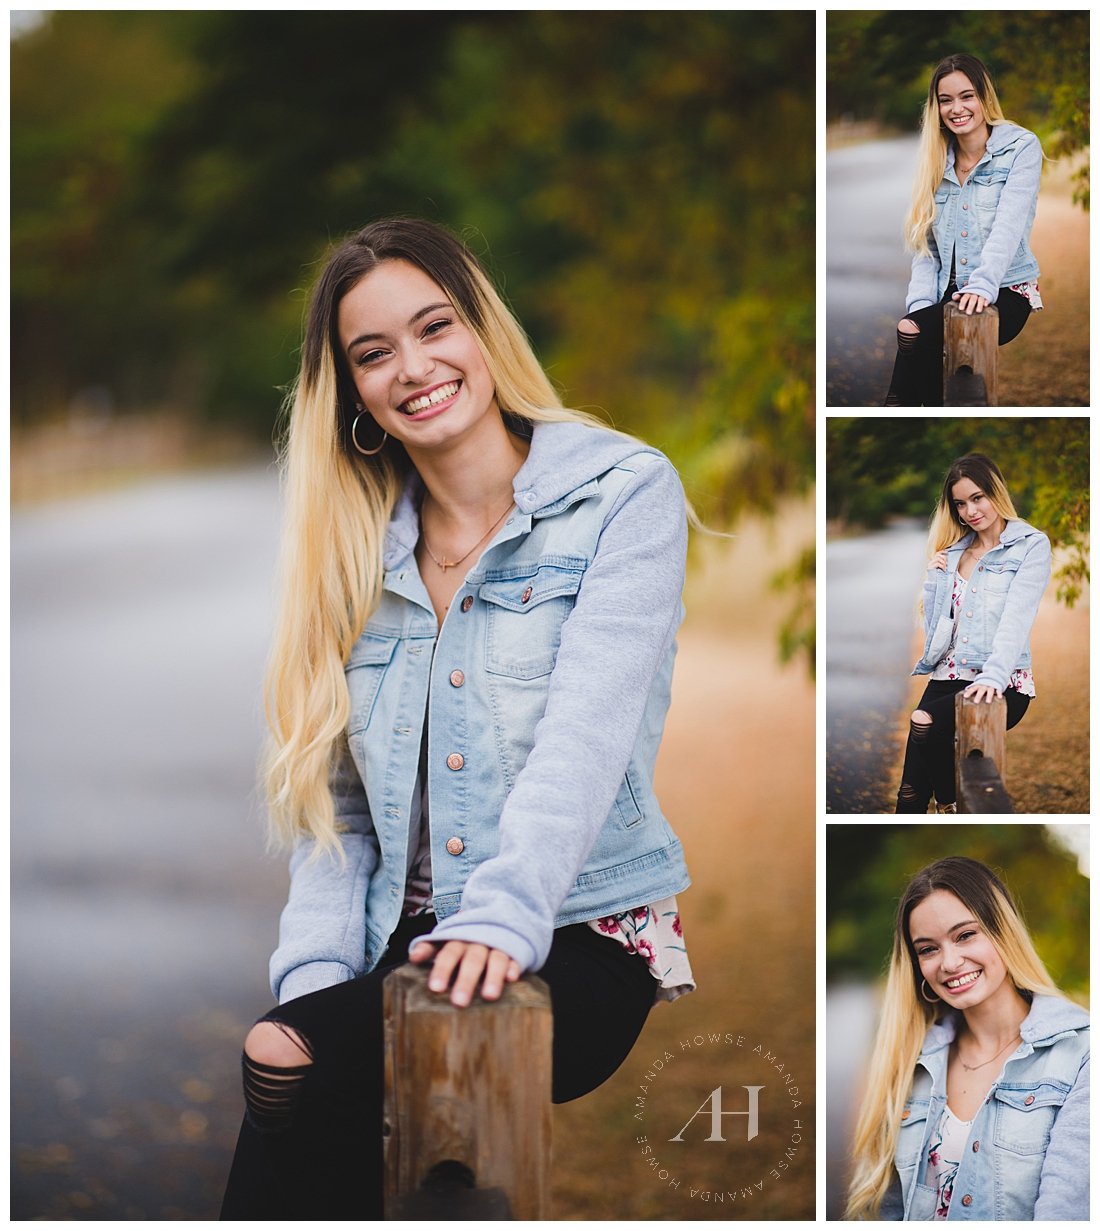 Casual Senior Portraits | Jean Jacket and Other Layers for Senior Portraits | Photographed by the Best Tacoma Senior Photographer Amanda Howse